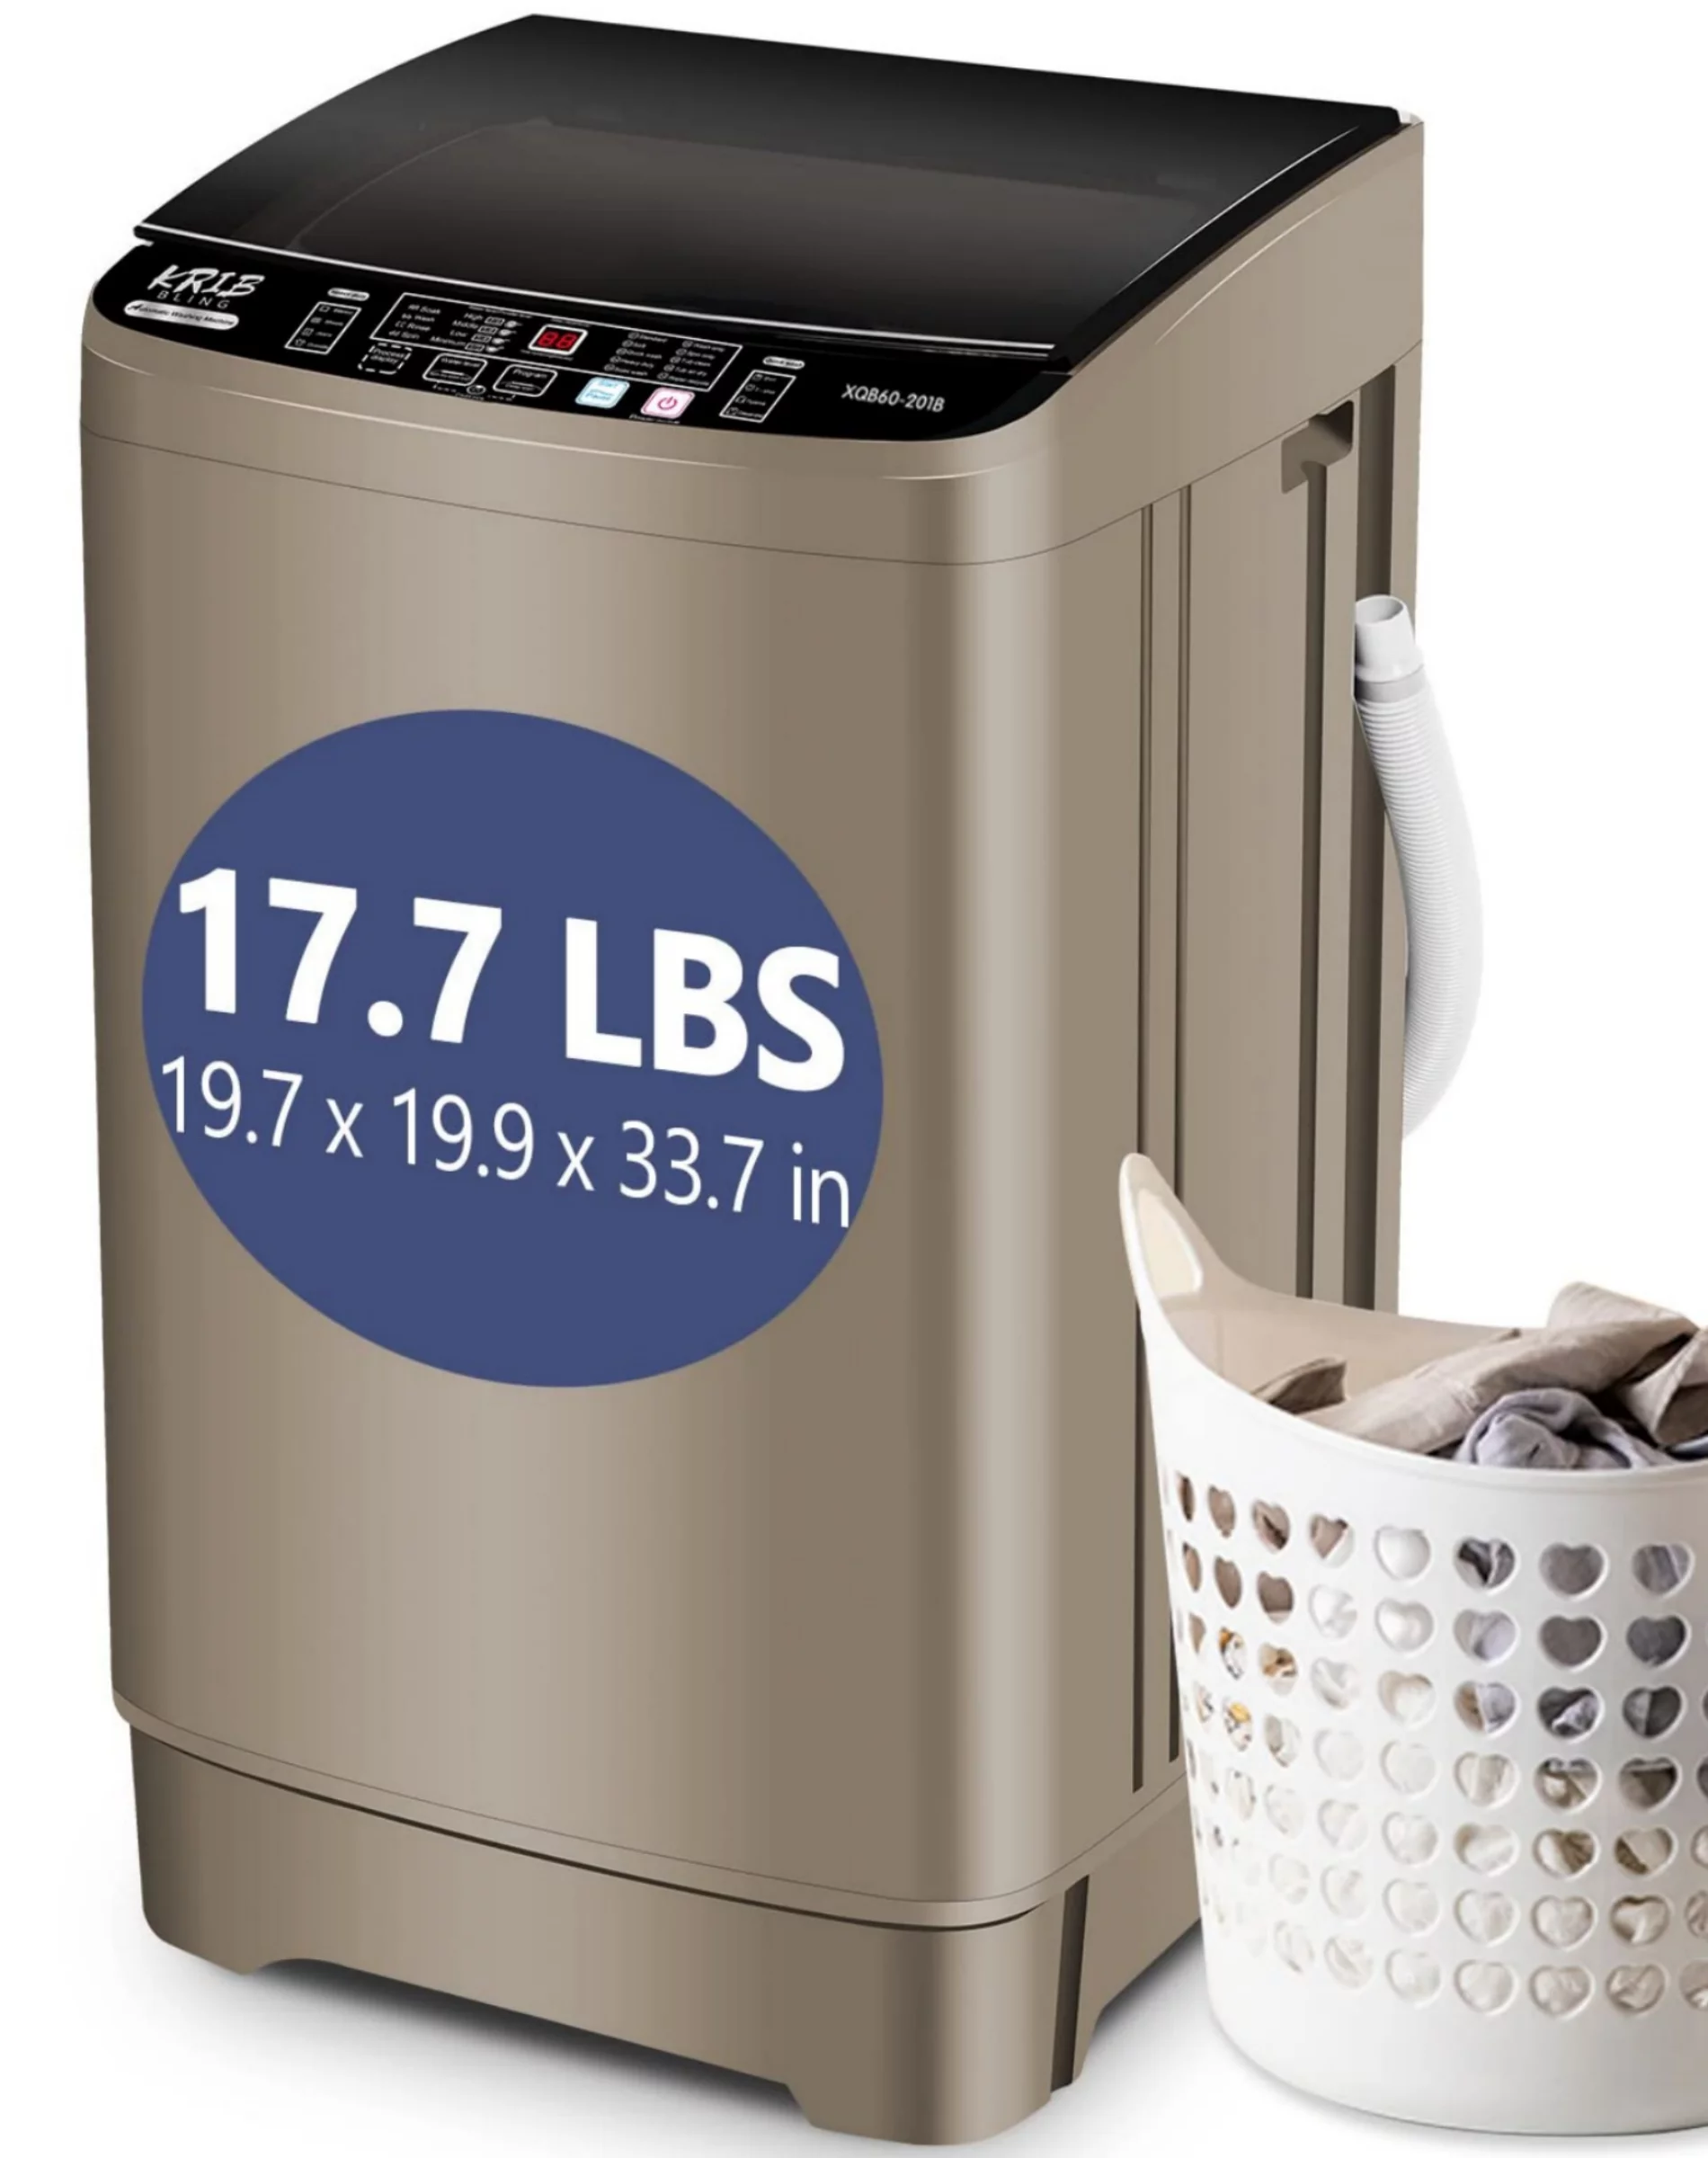 KRIB BLING Portable Washing Machine, 17.7 lbs Large Capacity Full Automatic Washing Machine, Compact Laundry Washer for Home Apartment, Coffee Gold